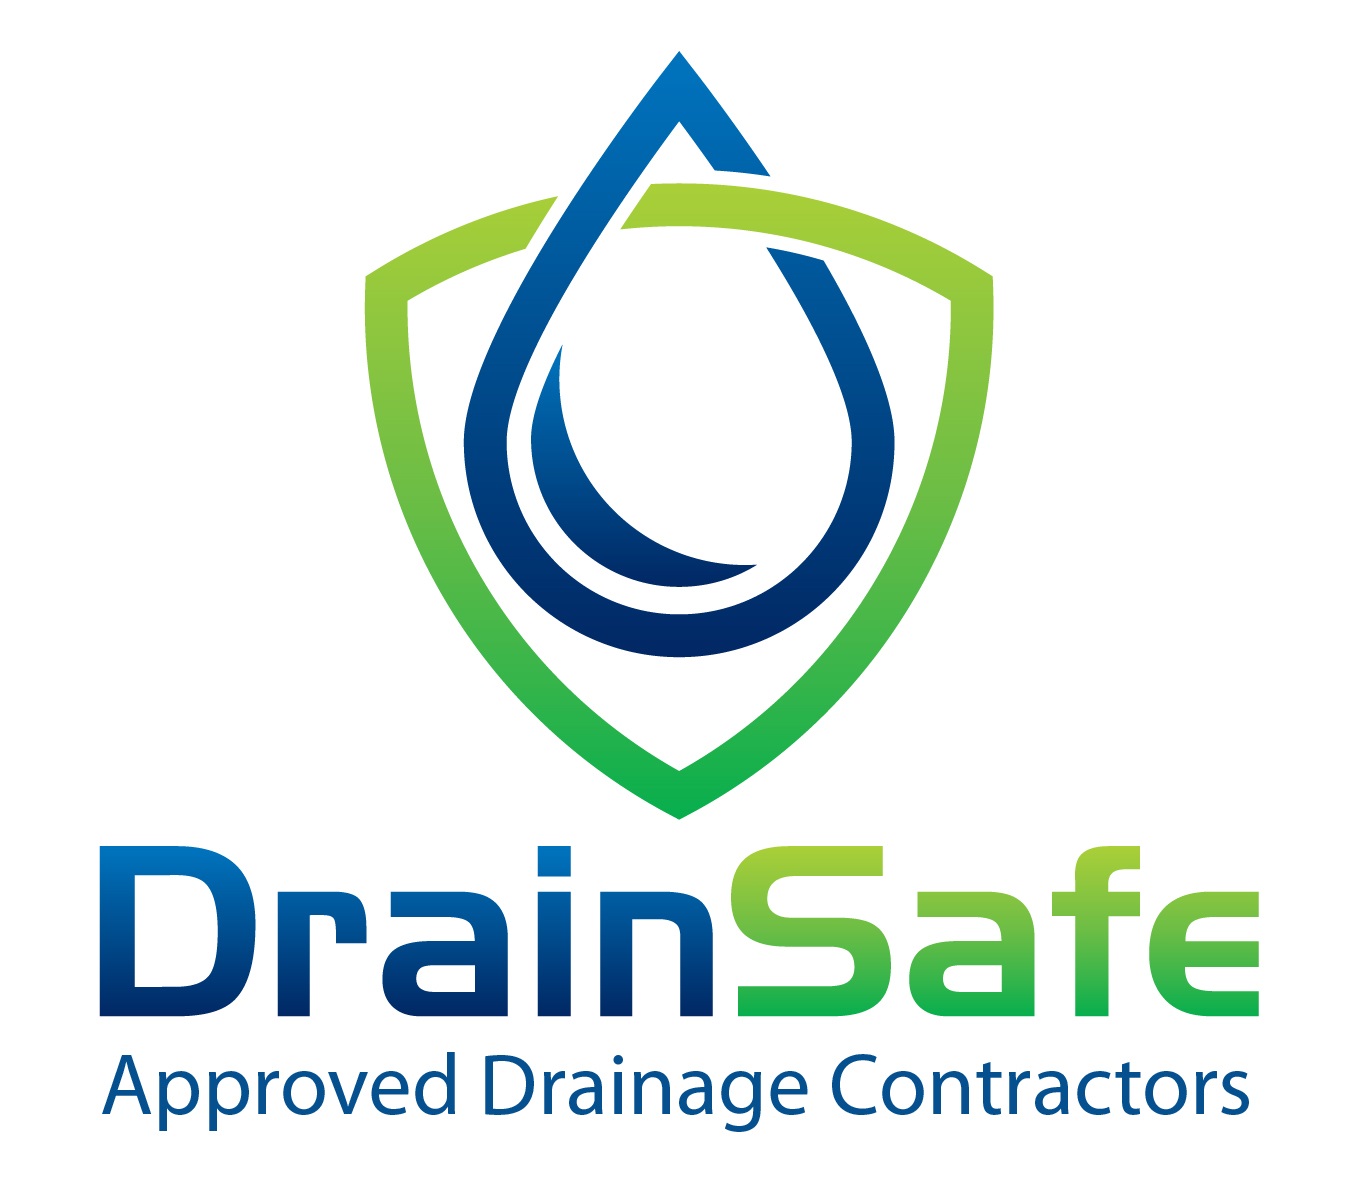 Drain Safe Approved Drainage Contractors - Certified Drains